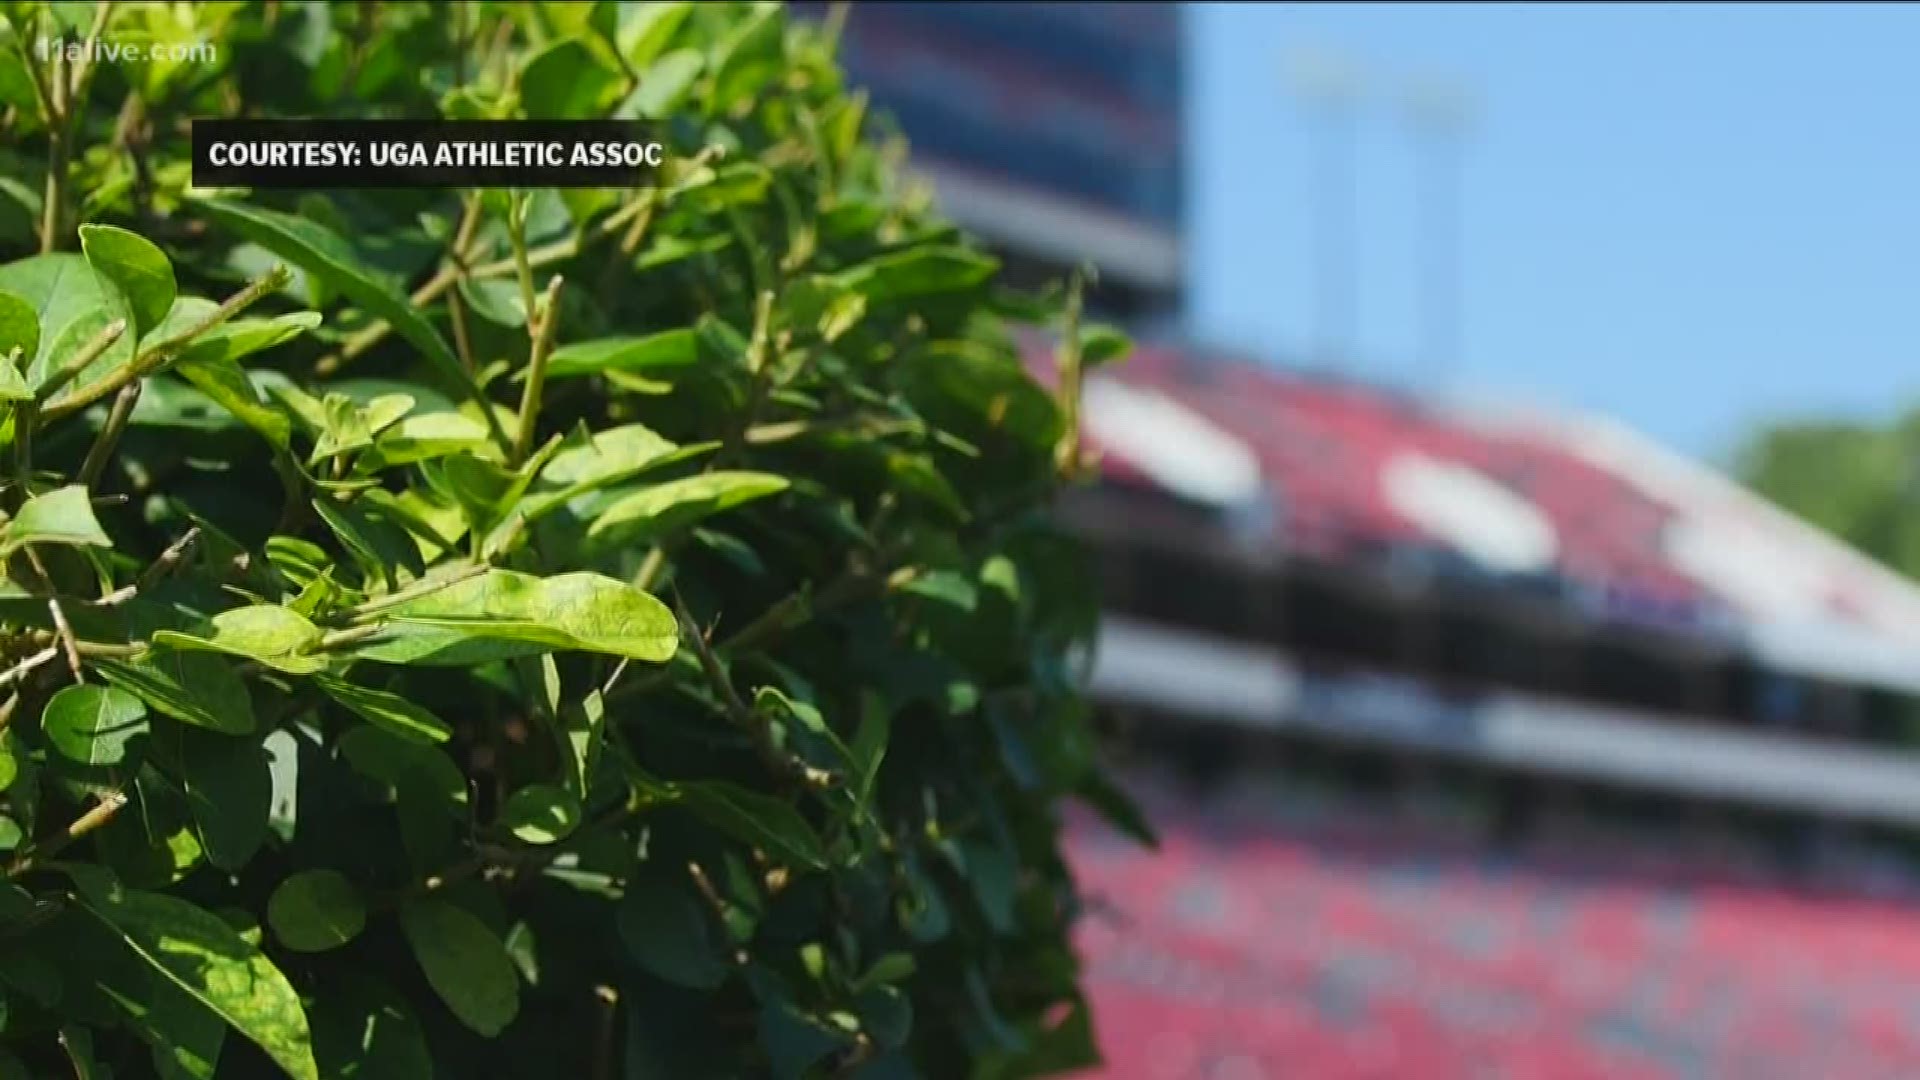 The field at Sanford Stadium is surrounded by lush green privet